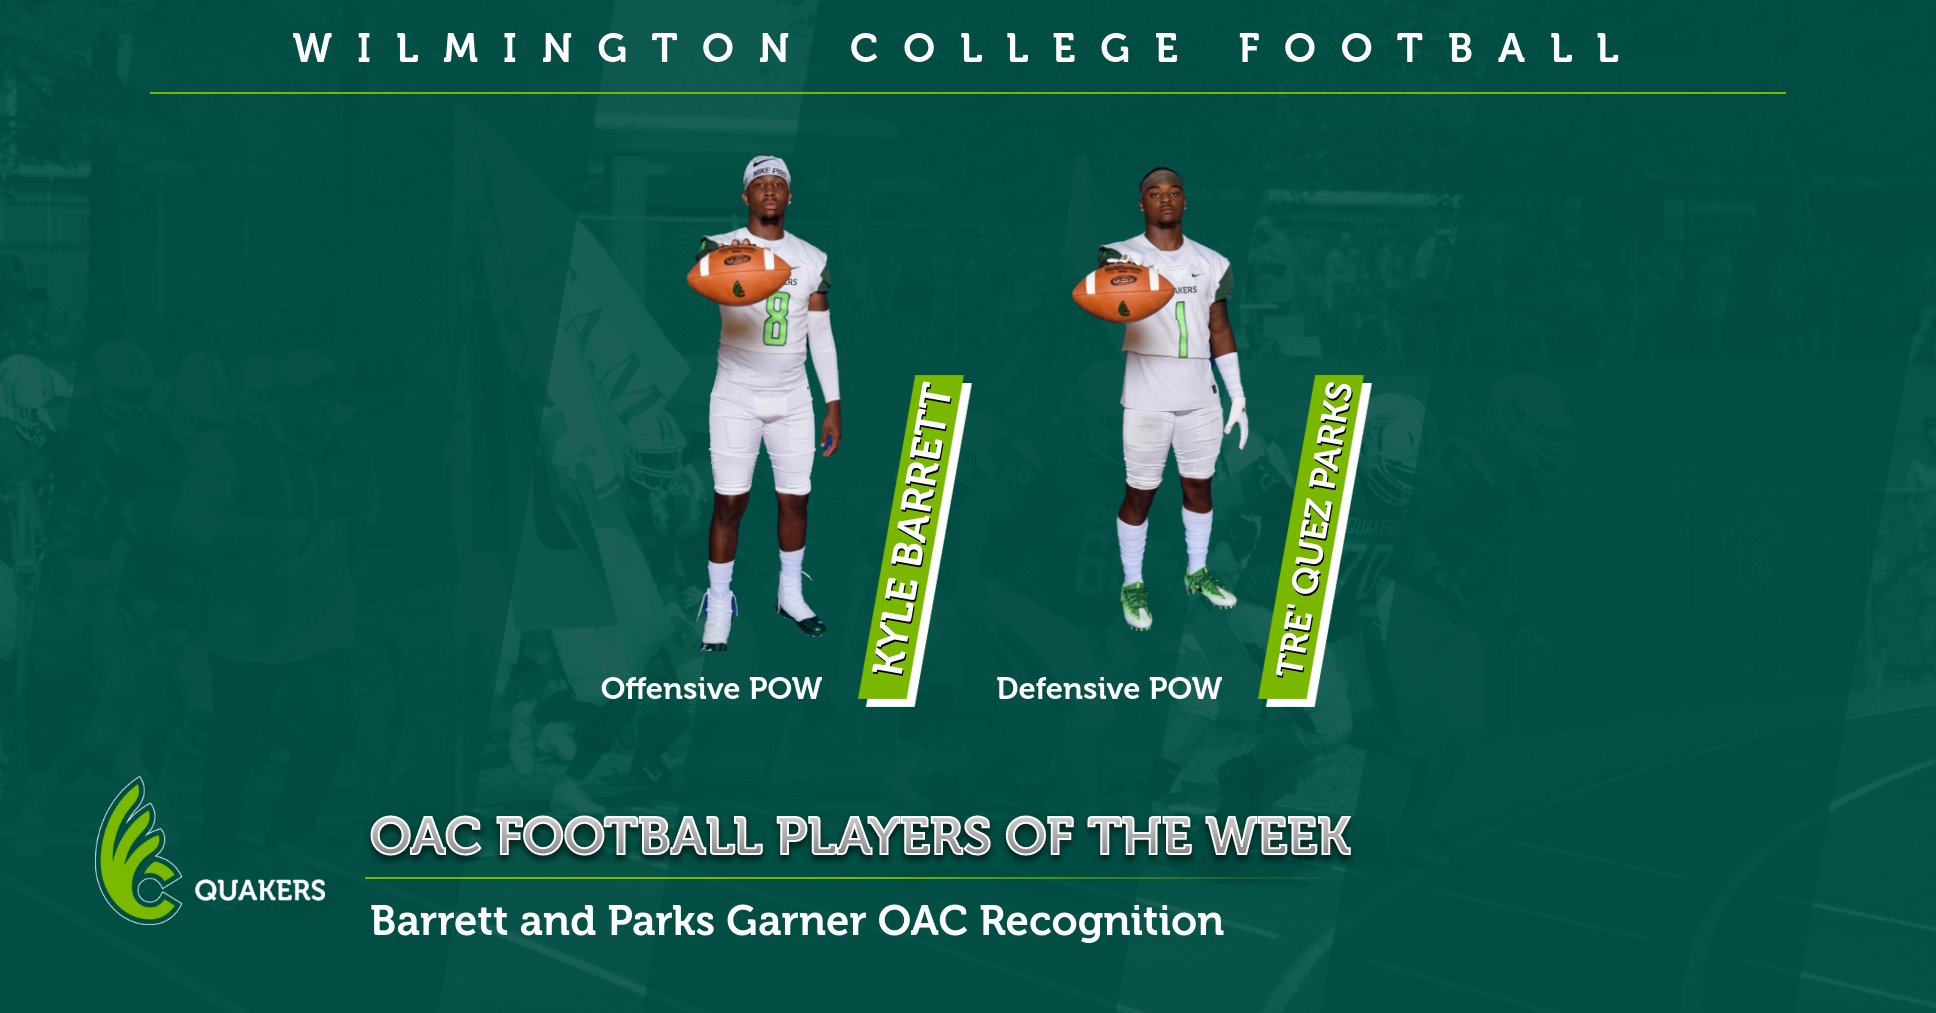 Barrett and Parks Named OAC Football Players of the Week